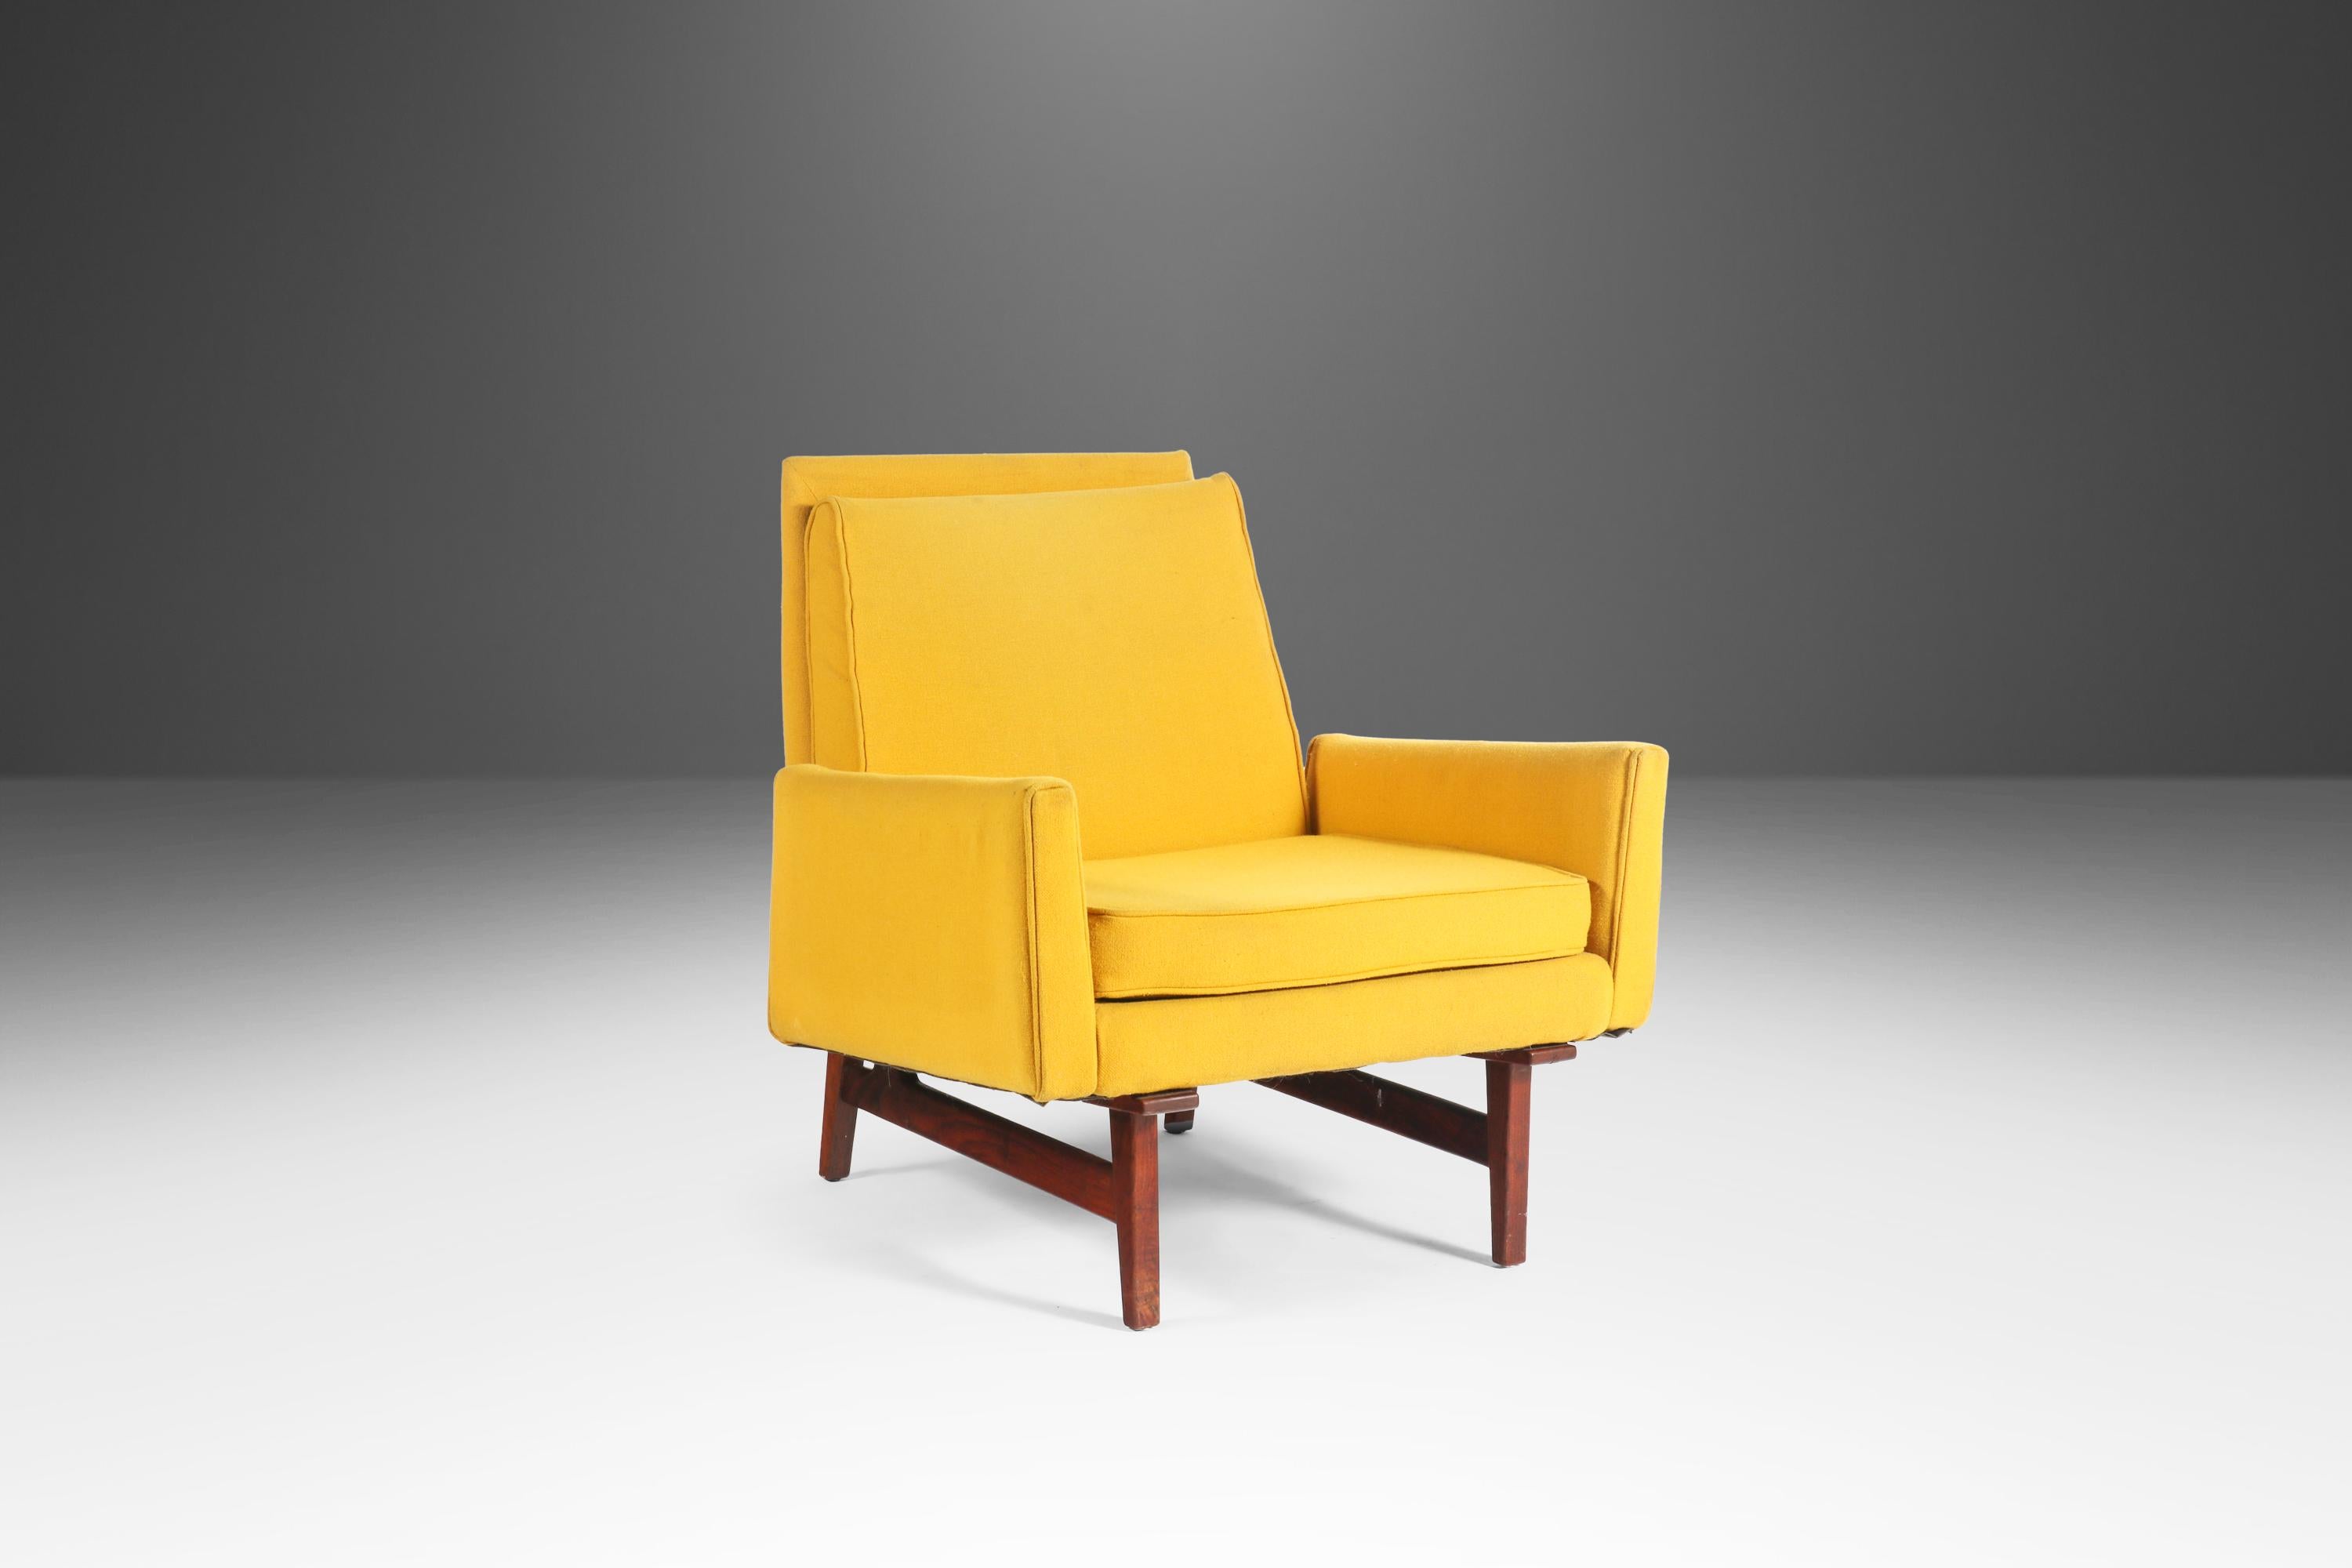 Ultra-rare, ultra-dazzling and ultra-comfortable. This extraordinary armchair has it all! Expertly-designed by Danish-American designer Jens Risom, this splendid lounger is the perfect amalgamation of Danish and American Modern aesthetics. The